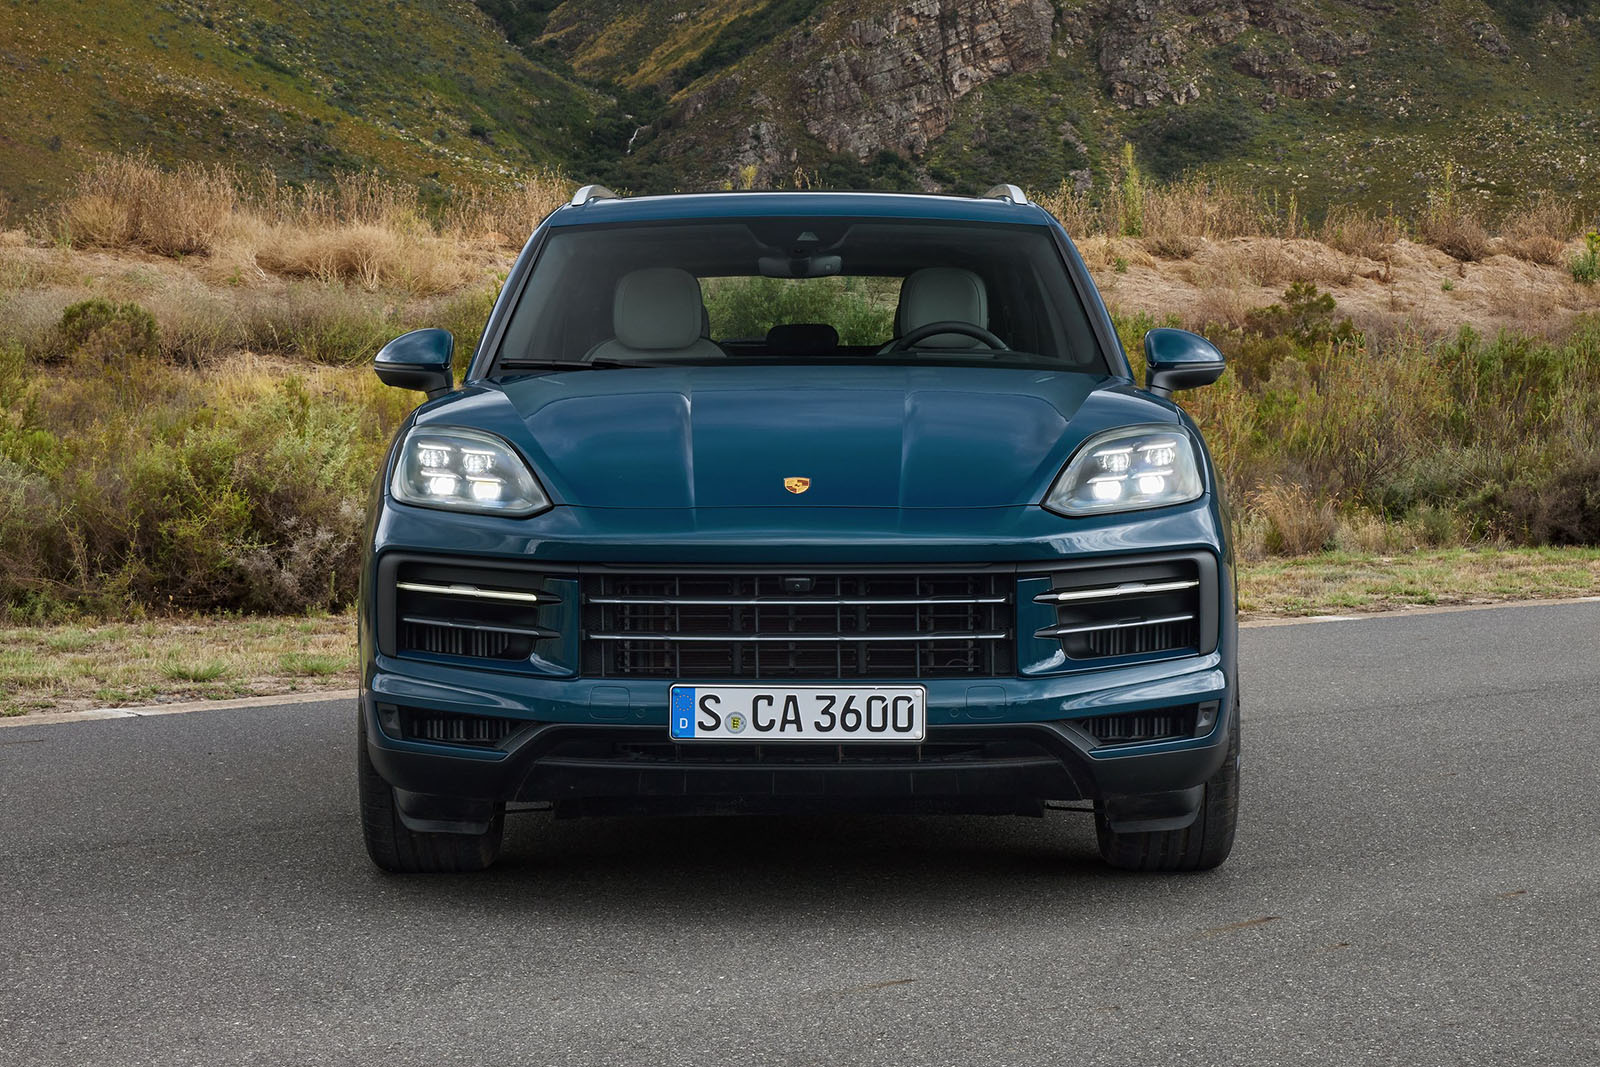 2023 Porsche Cayenne price, first drive review, facelift, engine,  performance, exterior, interior, features - Introduction